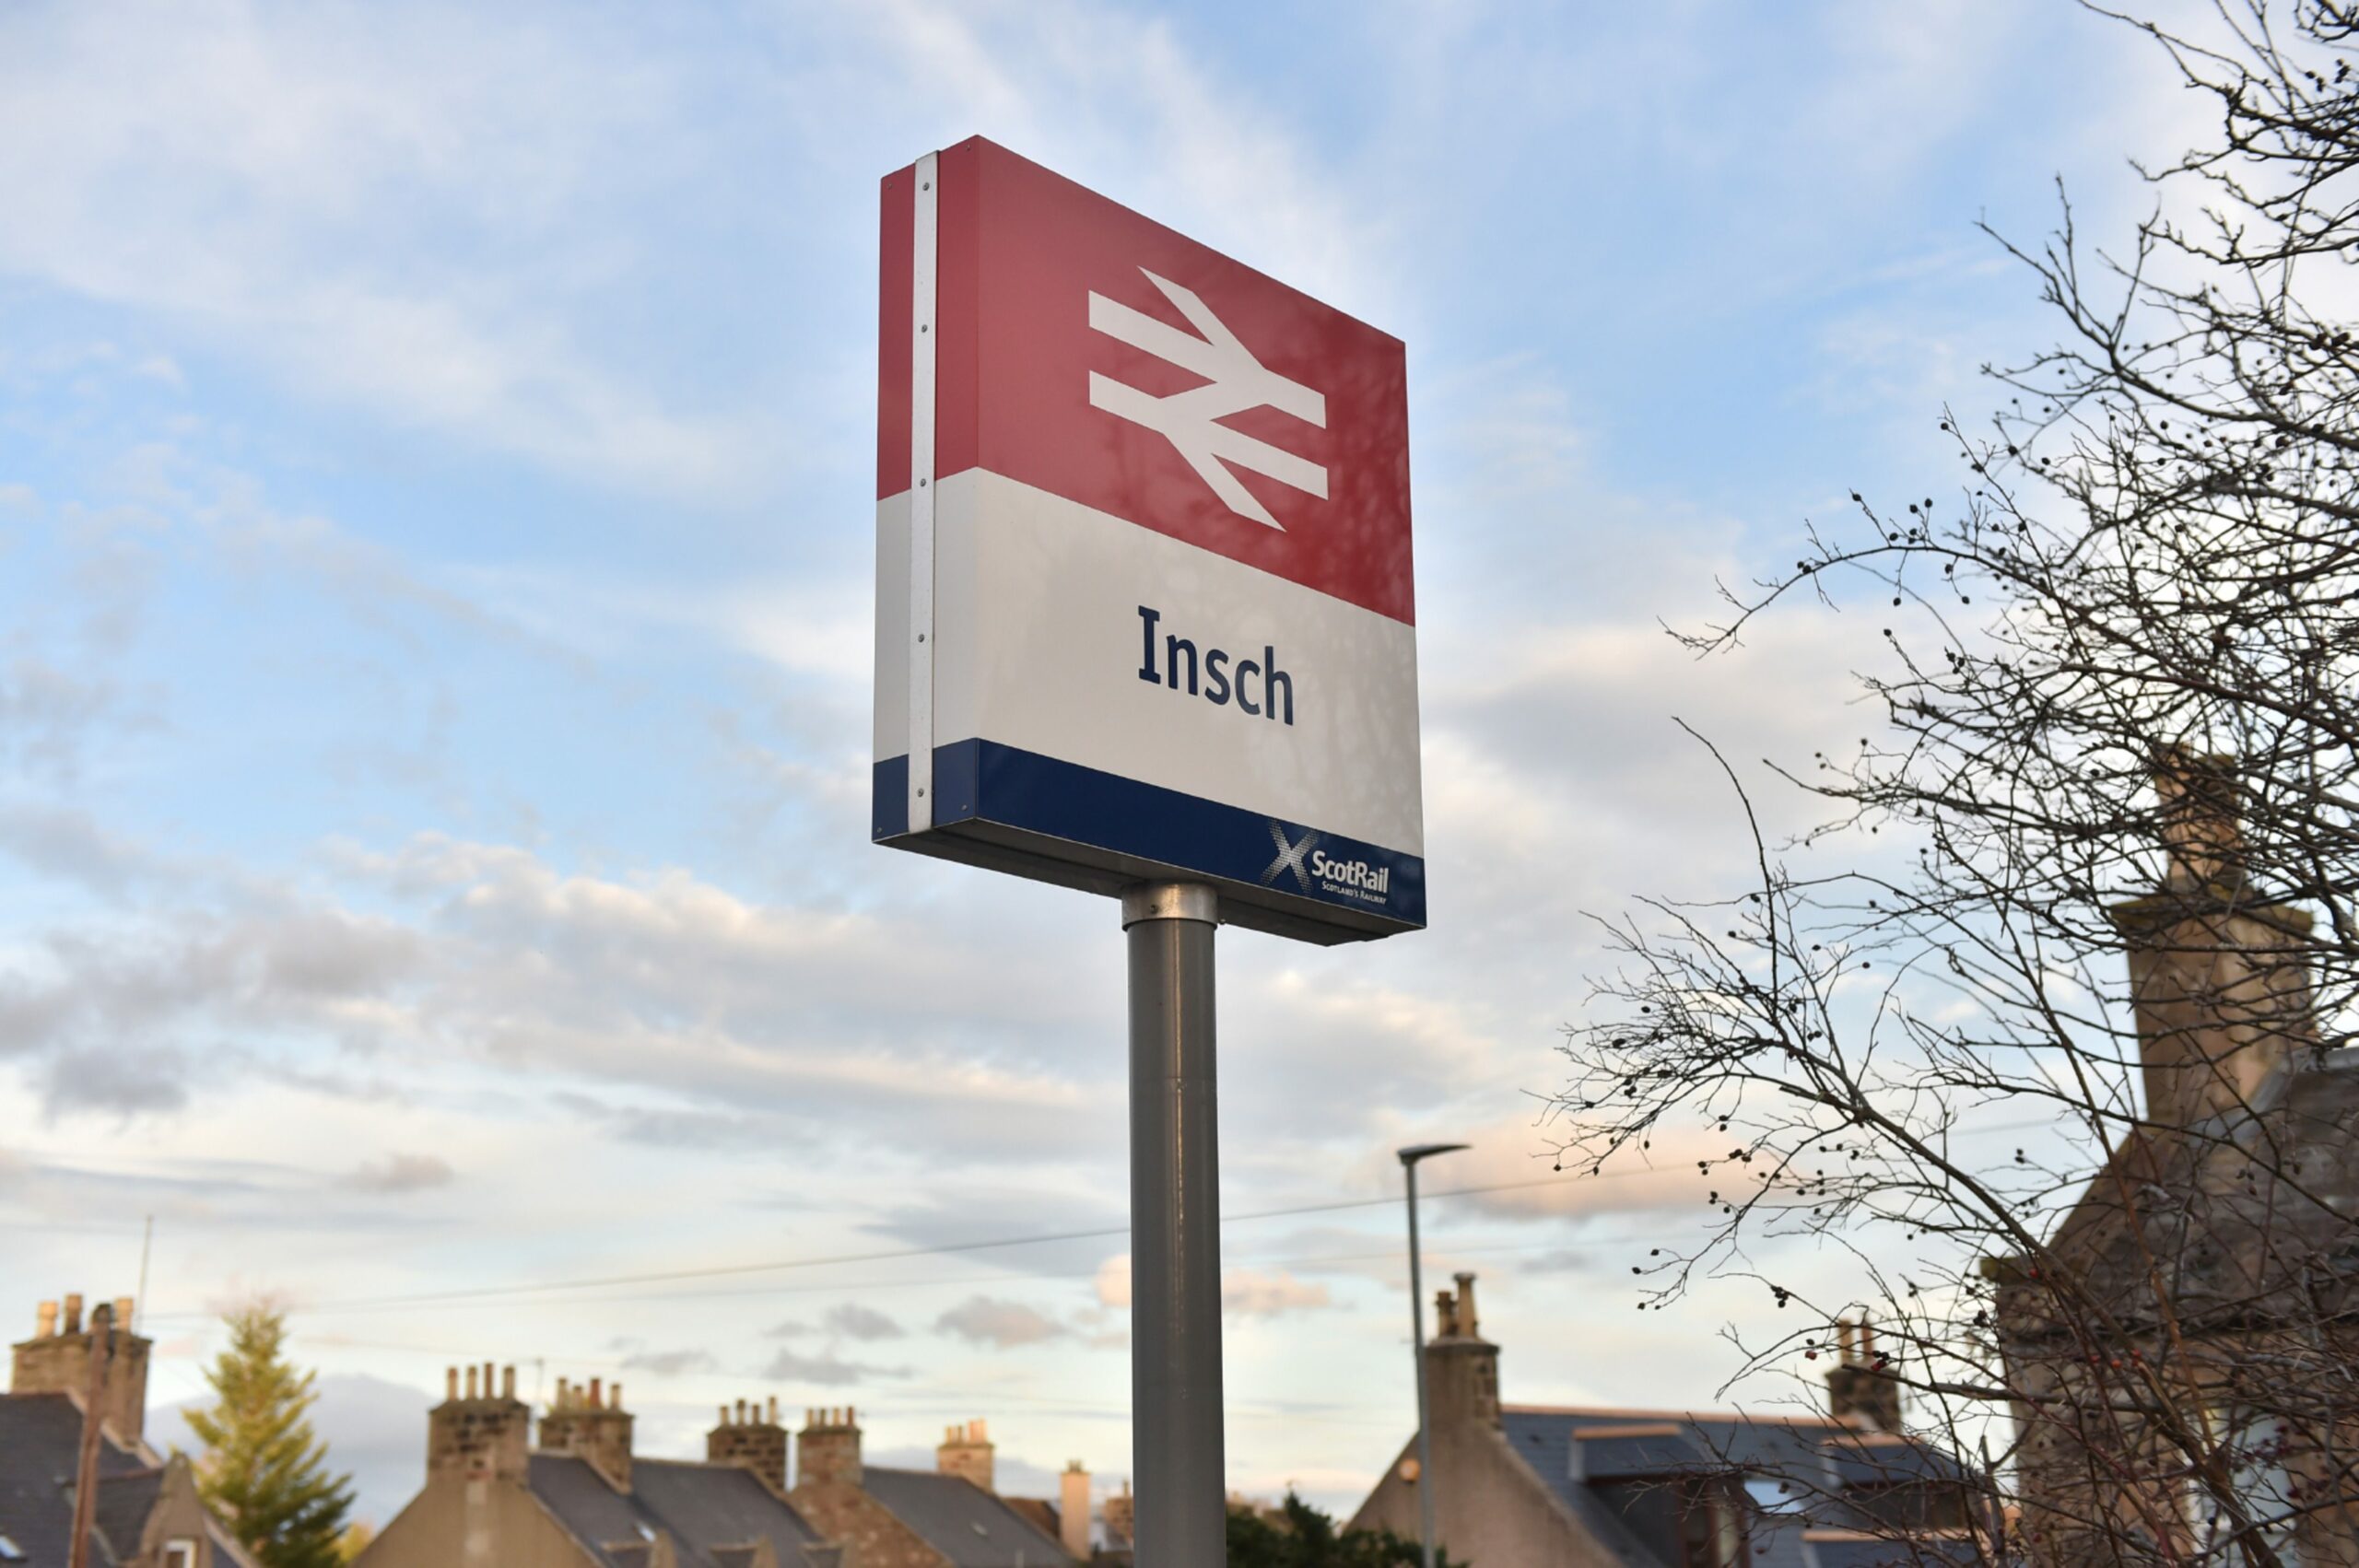 the Insch station sign